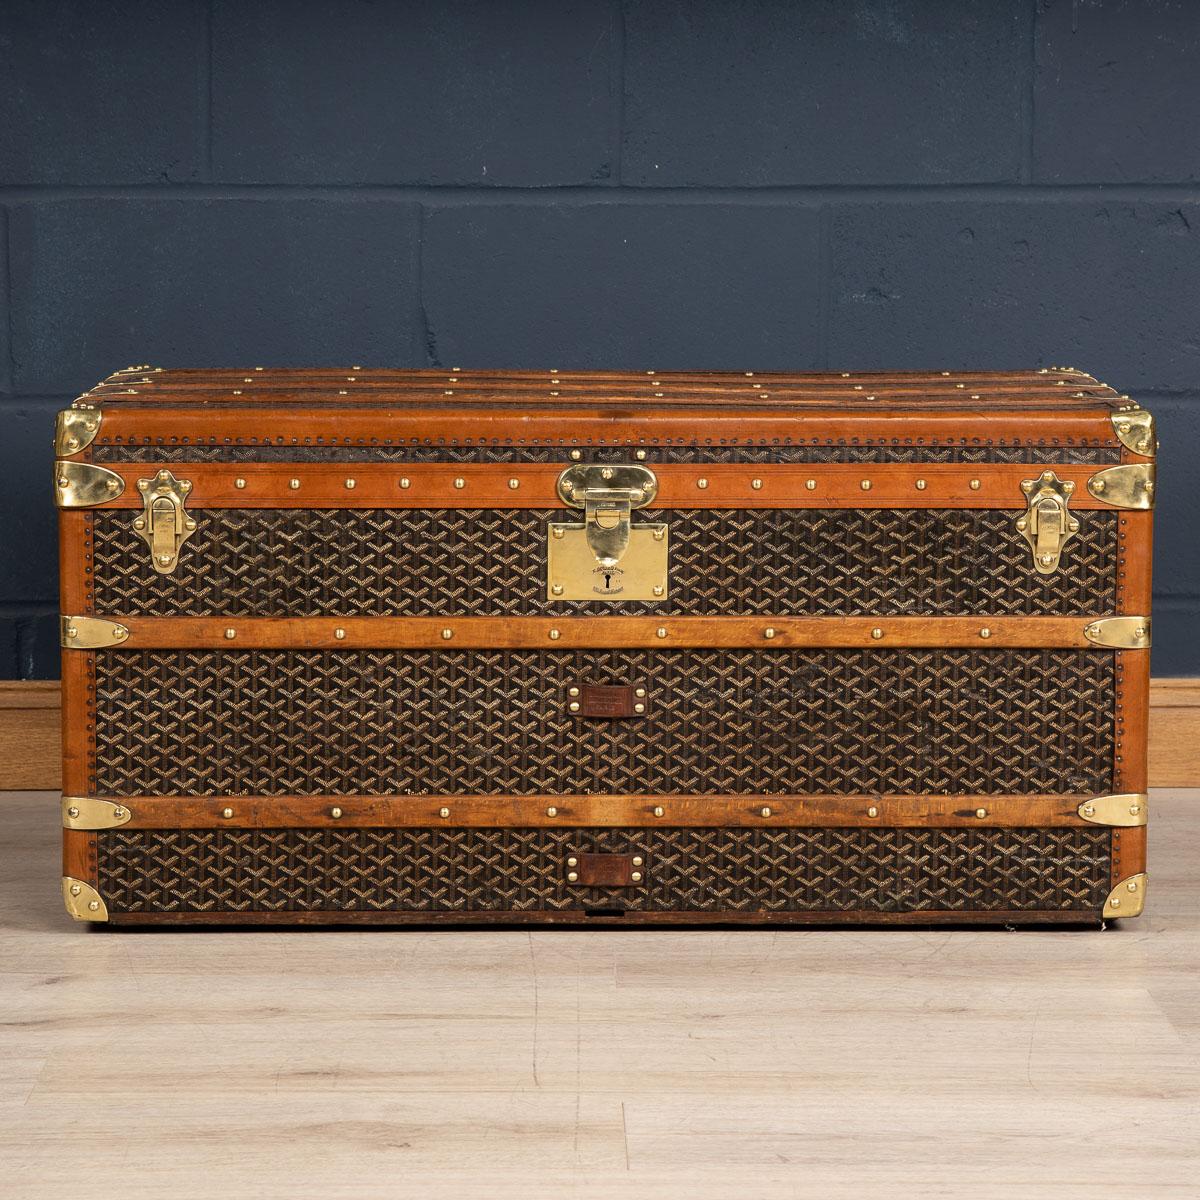 Antique 20th Century Goyard trunk dating to the early part of the 20th century. Over recent years the brand has been relaunched and has taken the world of fashion by storm. The original E. Goyard firm was a trunk maker which rivalled LV and the